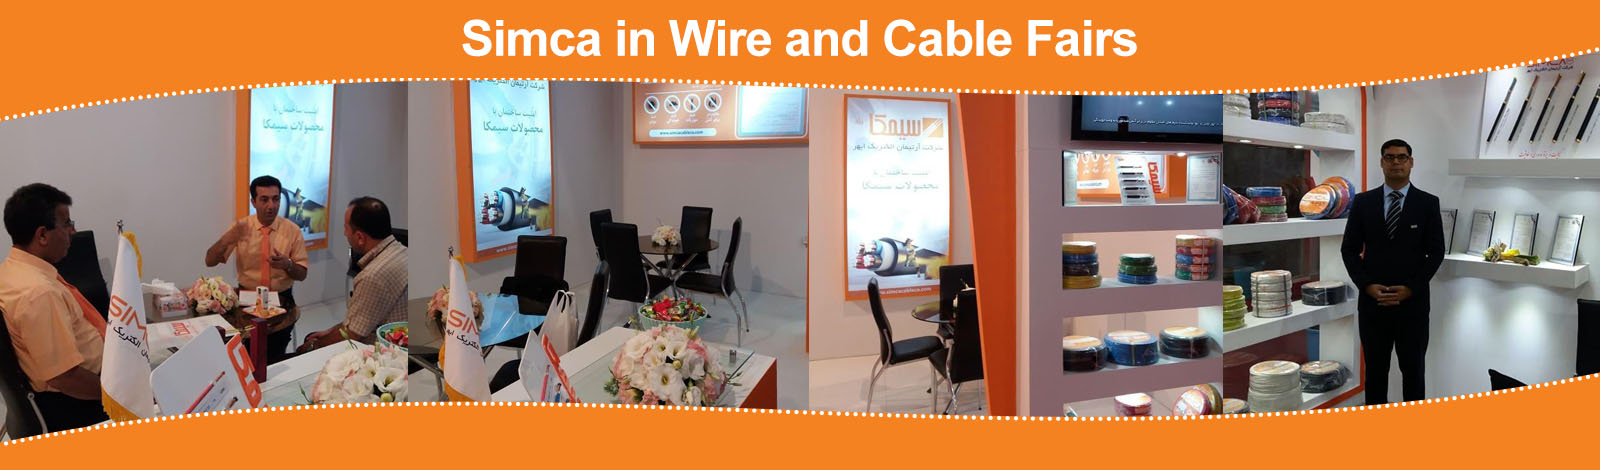 Simca Cable Co in Fairs